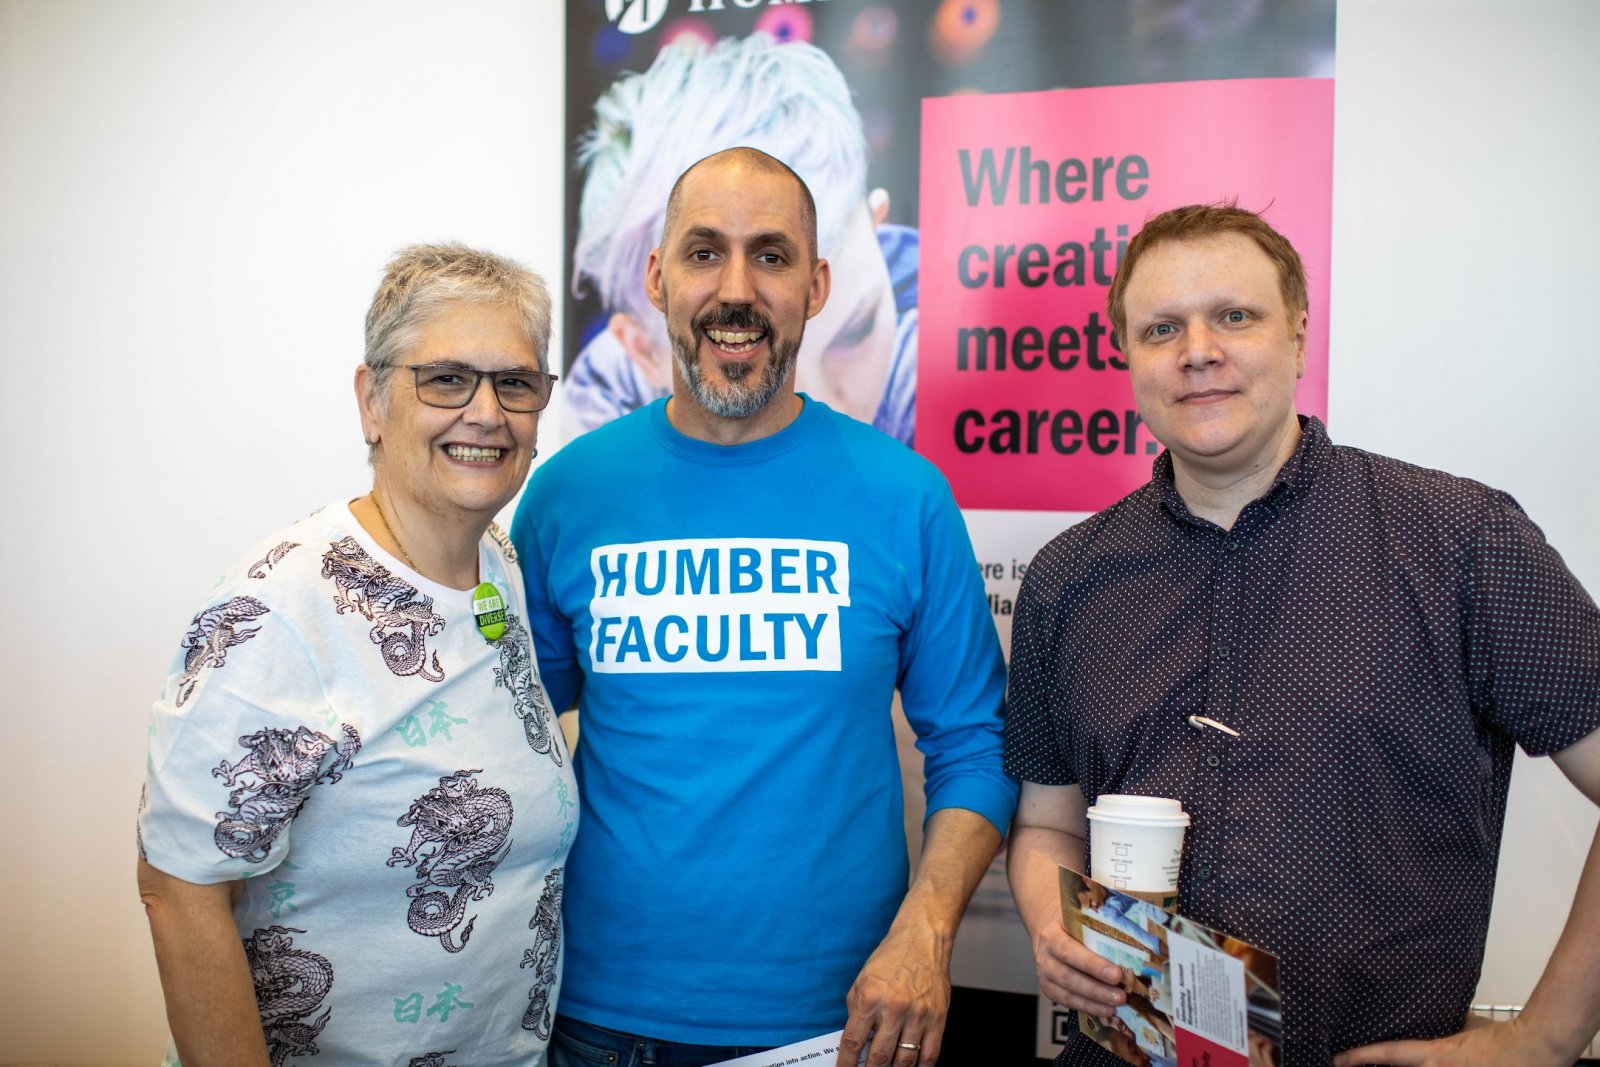 Three people posing together; one has a t-shirt that says Humber Faculty.